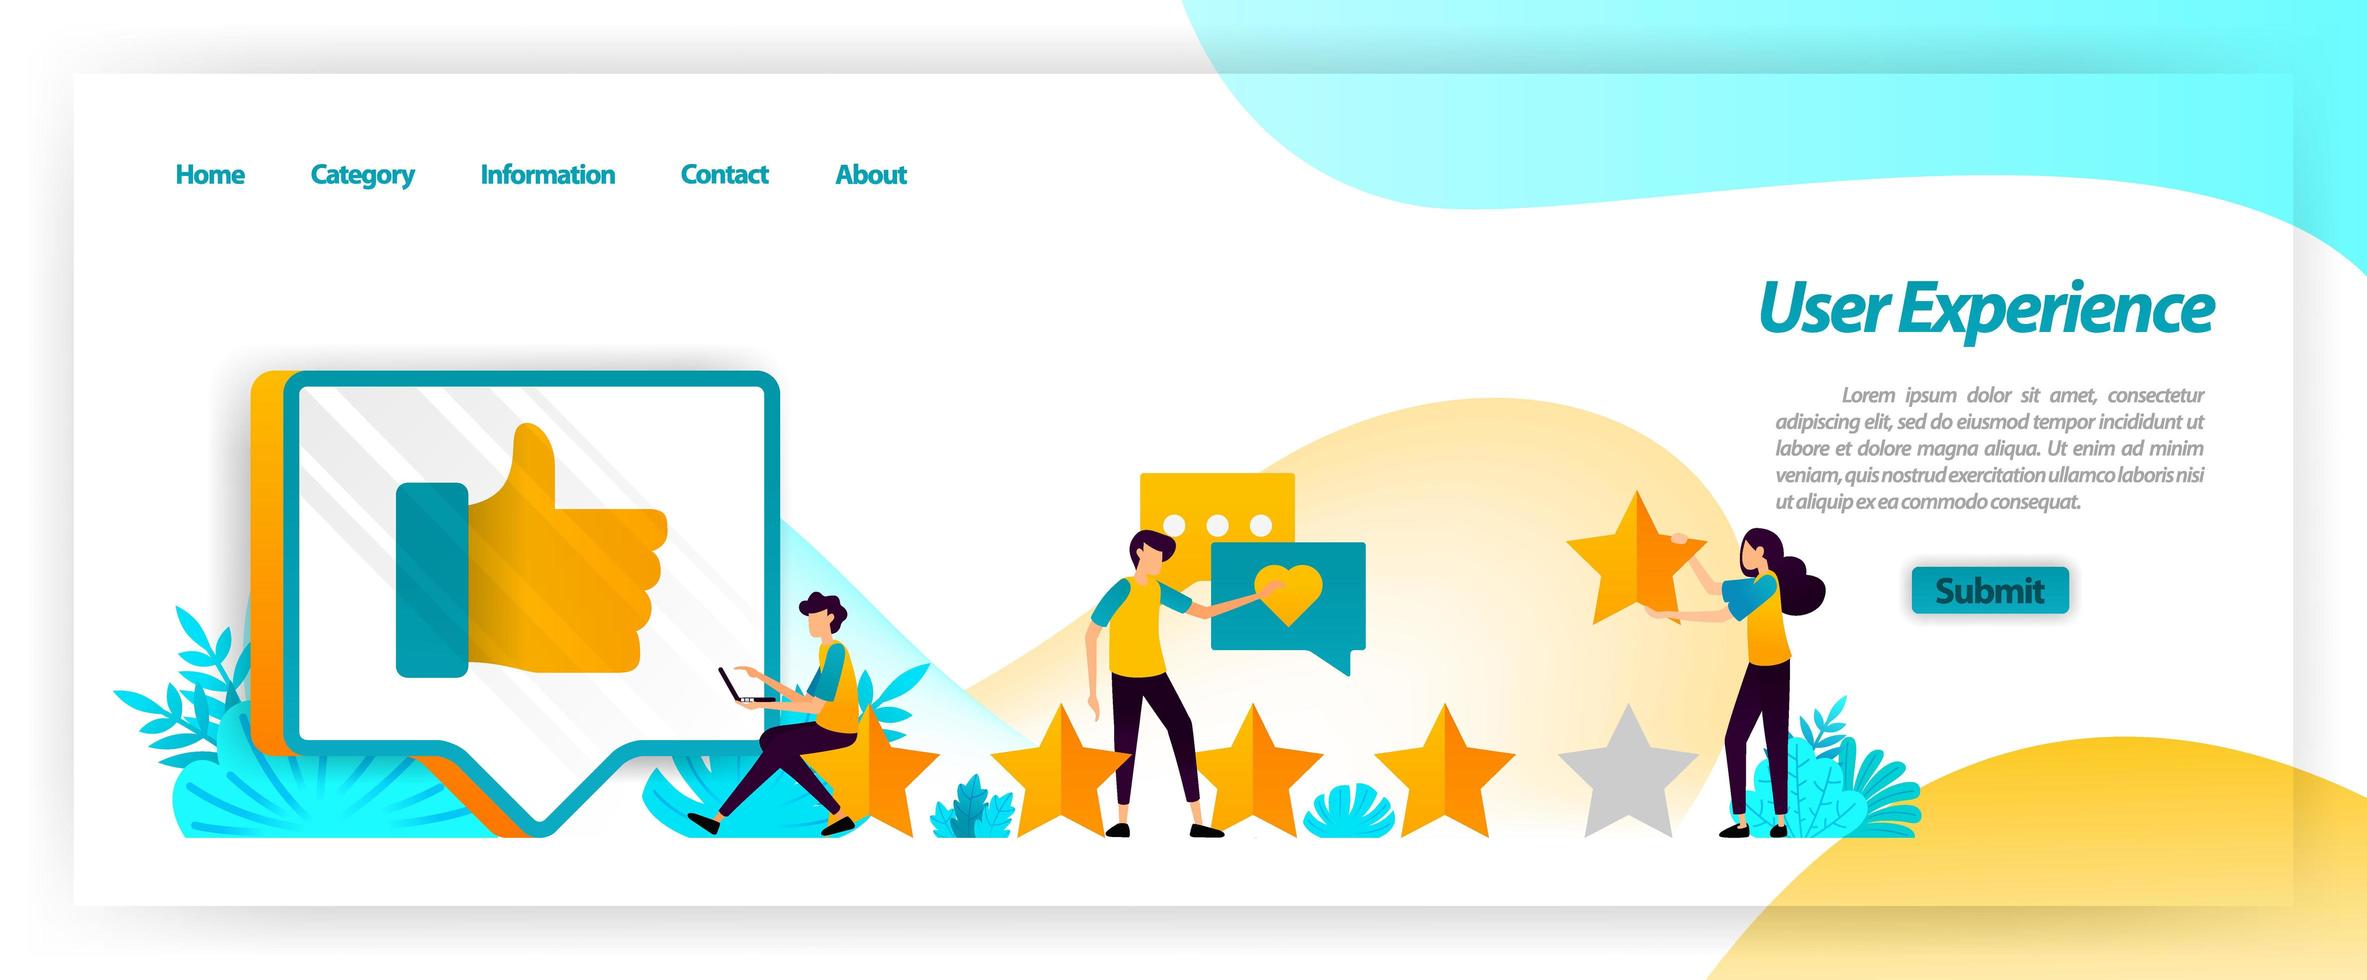 User experience including comments, ratings and reviews is feedback in managing customer satisfaction when using services. vector illustration concept for landing page, ui ux, web, mobile app, poster